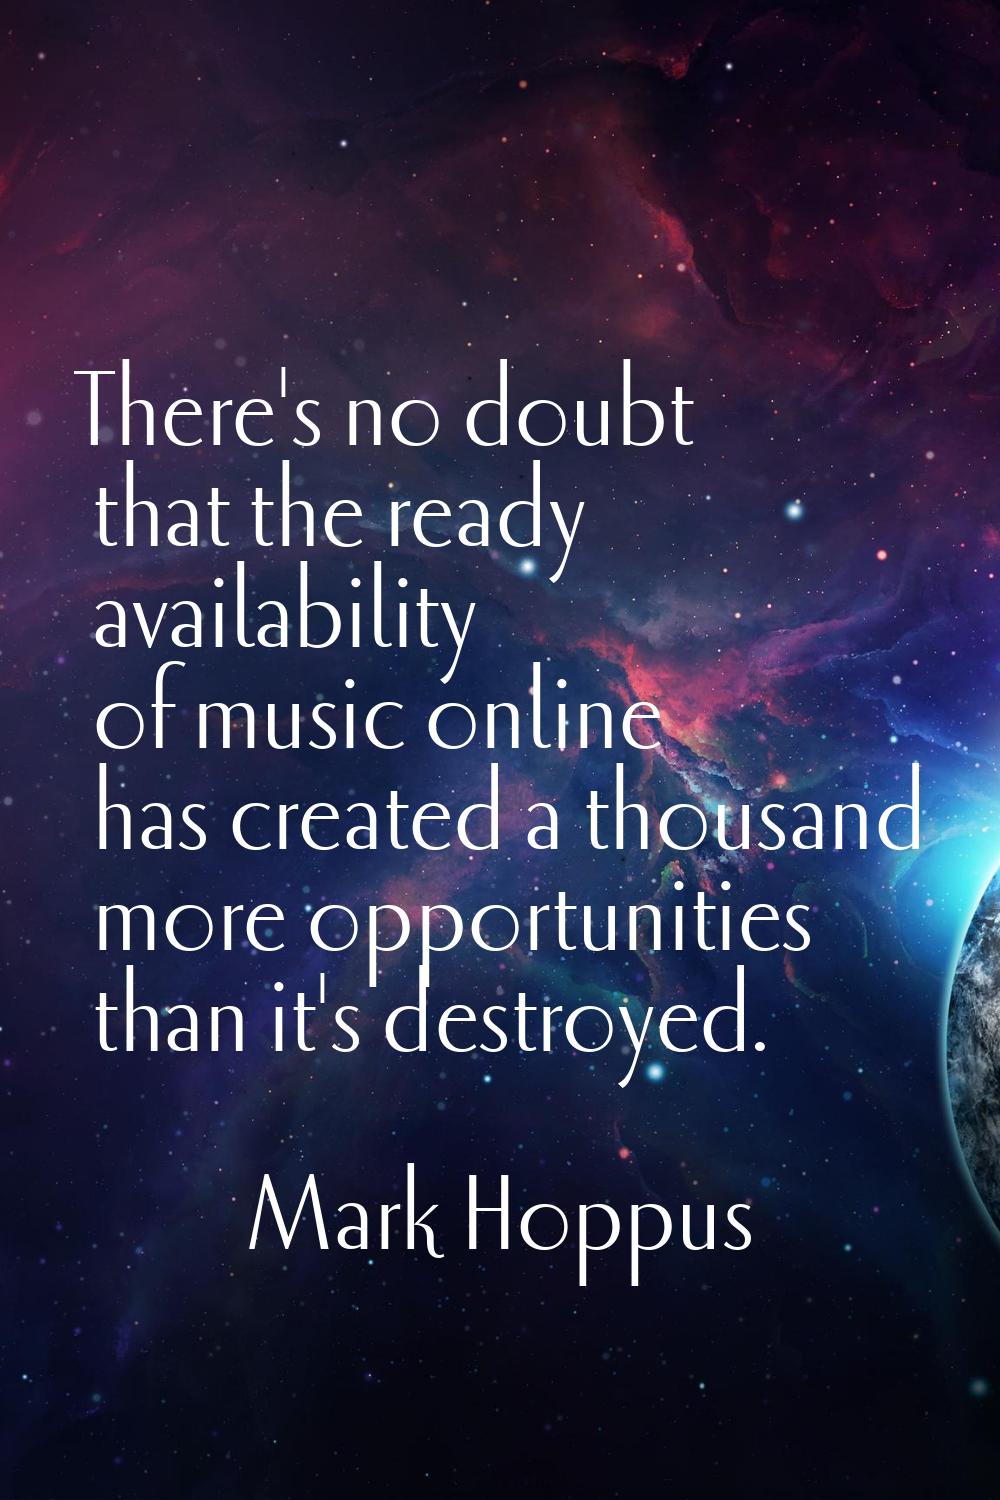 There's no doubt that the ready availability of music online has created a thousand more opportunit